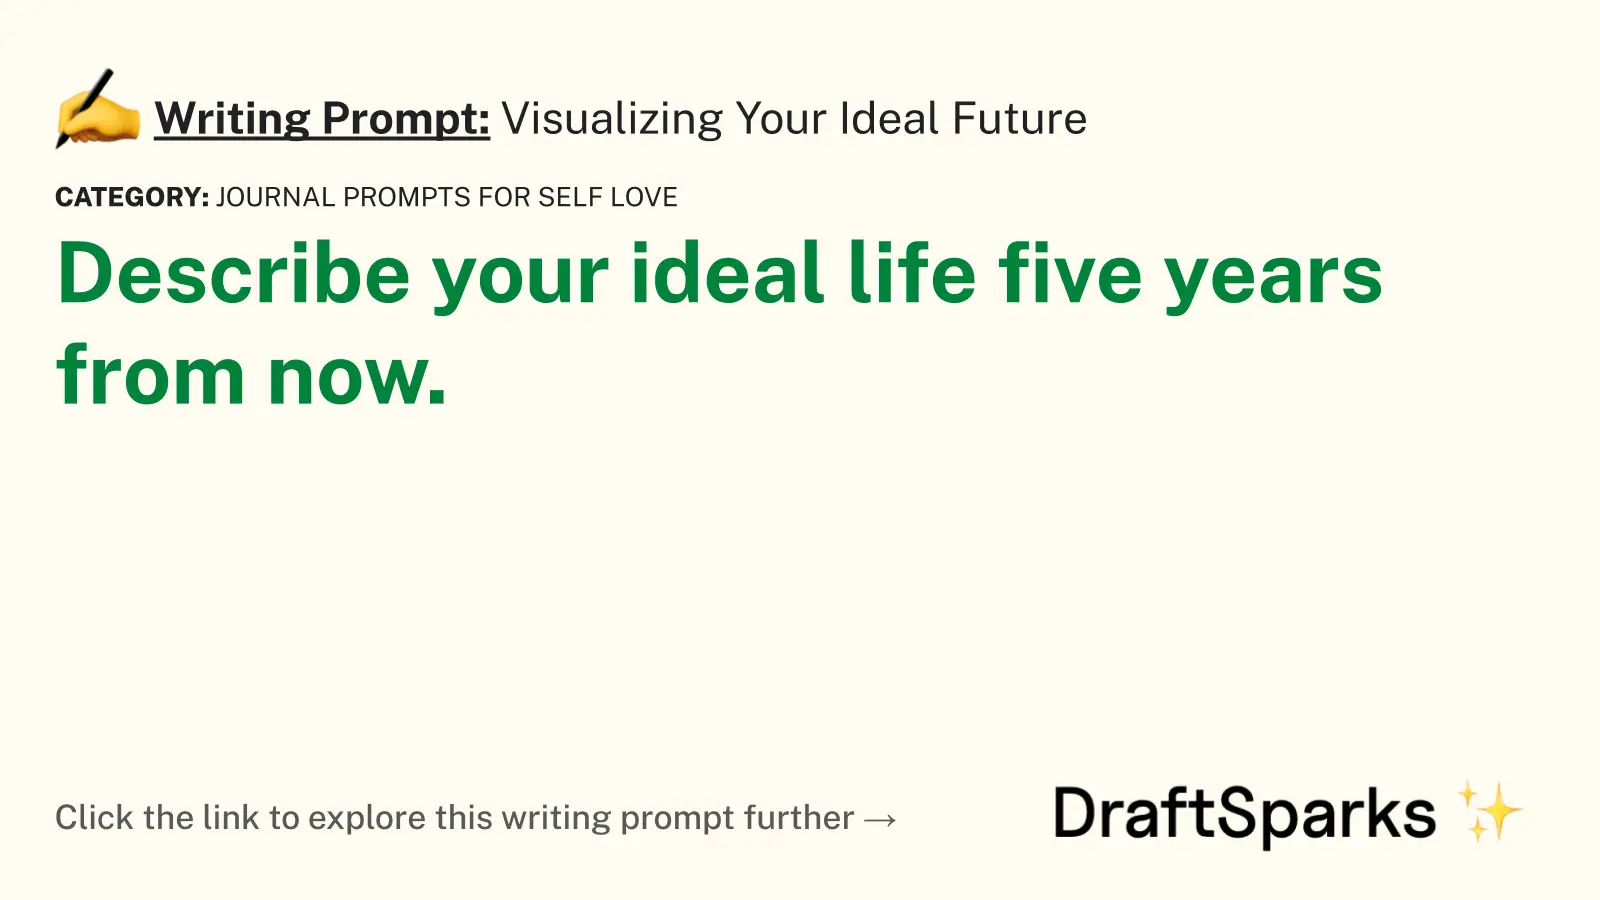 Visualizing Your Ideal Future